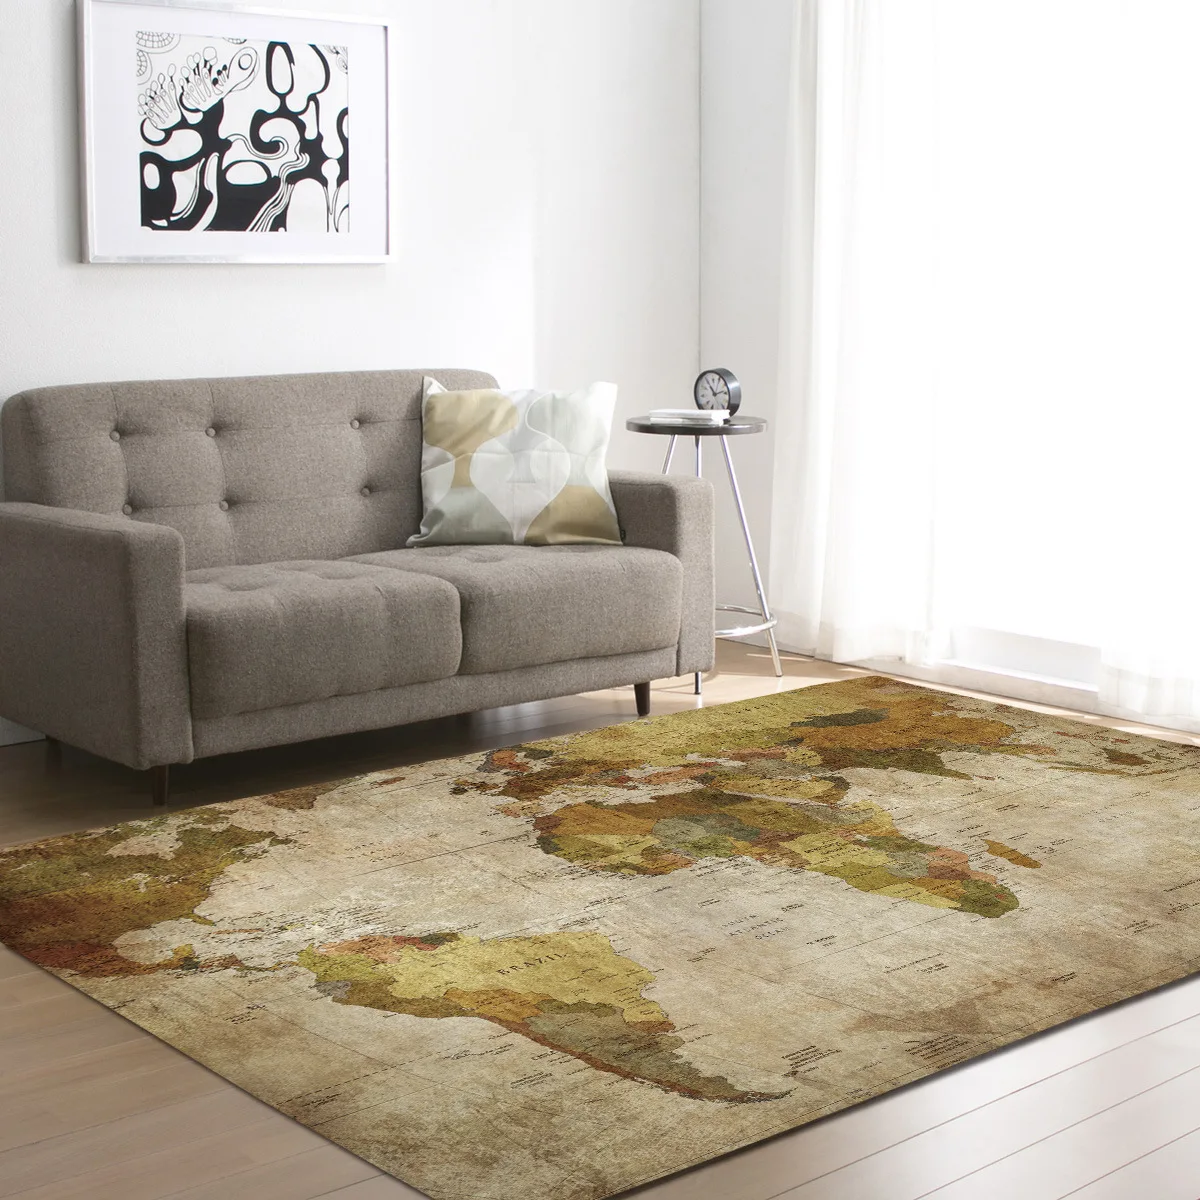 

Large World Map Carpets Rug Bedroom Kids Baby Play Crawling Mat Memory Foam Area Rugs Carpet For Living Room Home Decorative